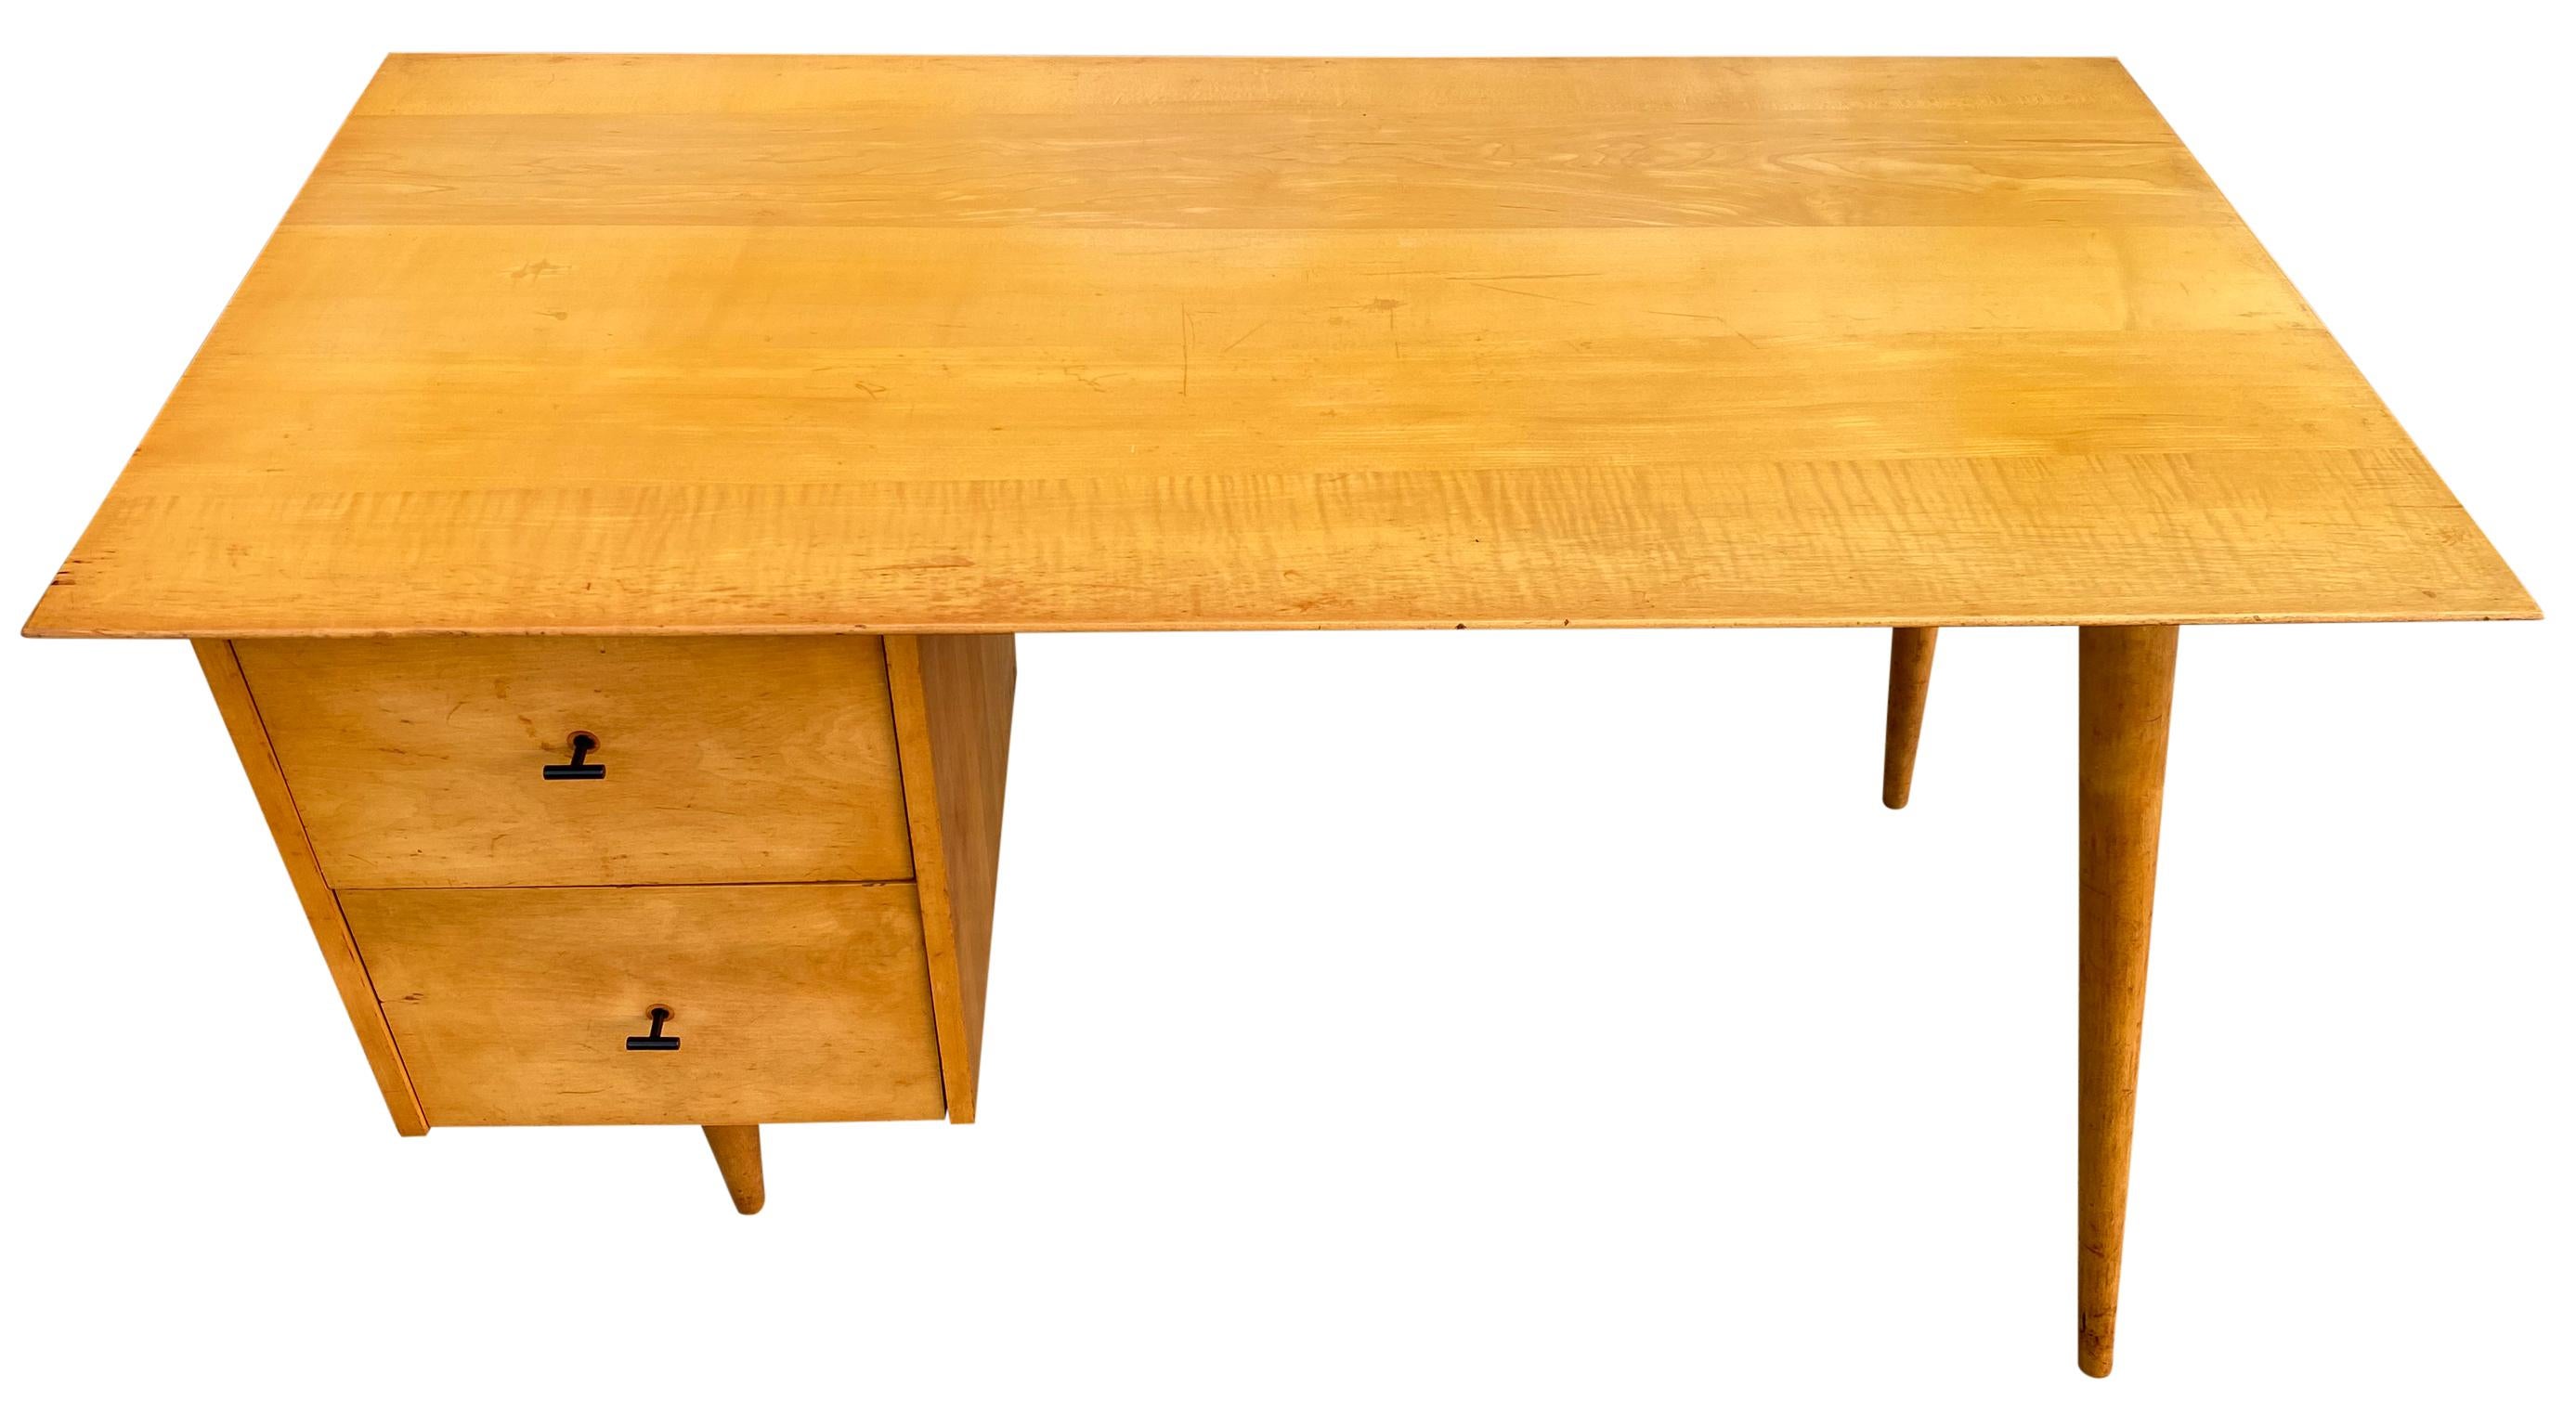 Beautiful Paul McCobb Planner Group #1560 double drawer desk blonde maple finish with steel T pull knobs solid maple. Desk is in great original vintage condition. Very beautiful designed desk on tapered legs, all solid maple. All legs unscrew.